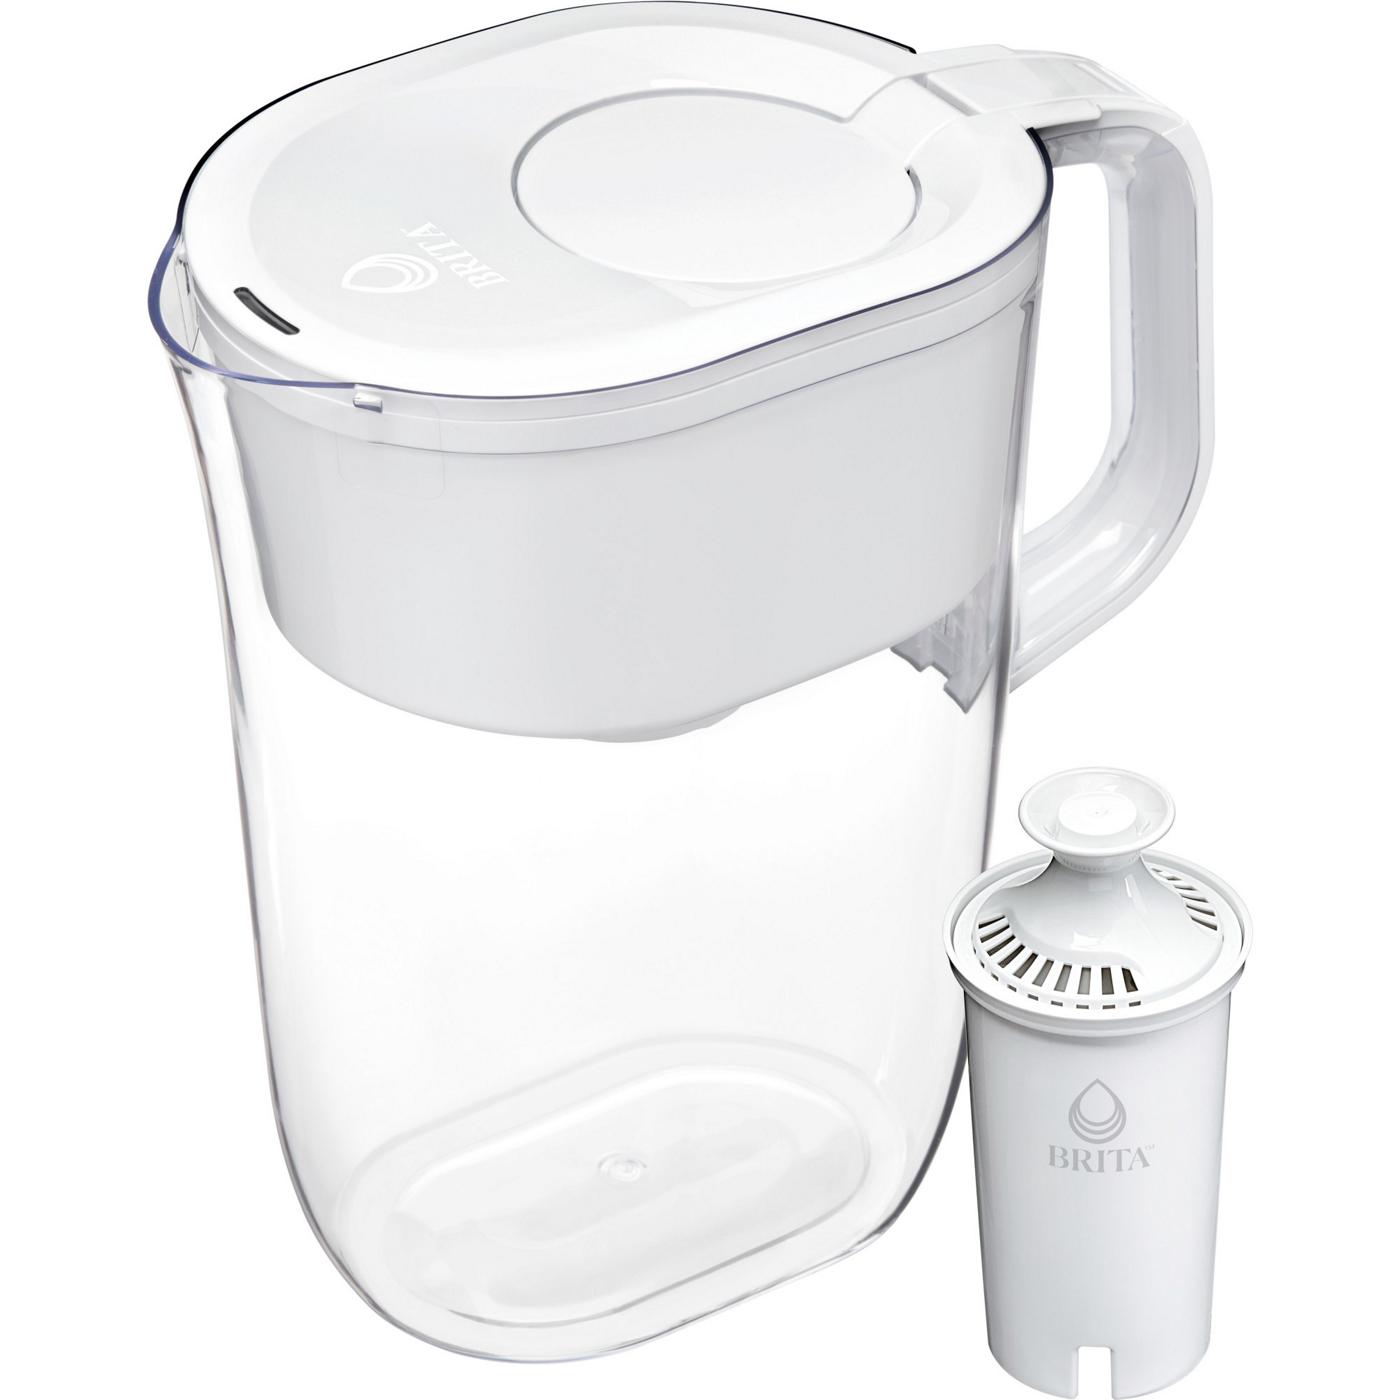 Brita Tahoe Water Filtration System Pitcher - White; image 5 of 10